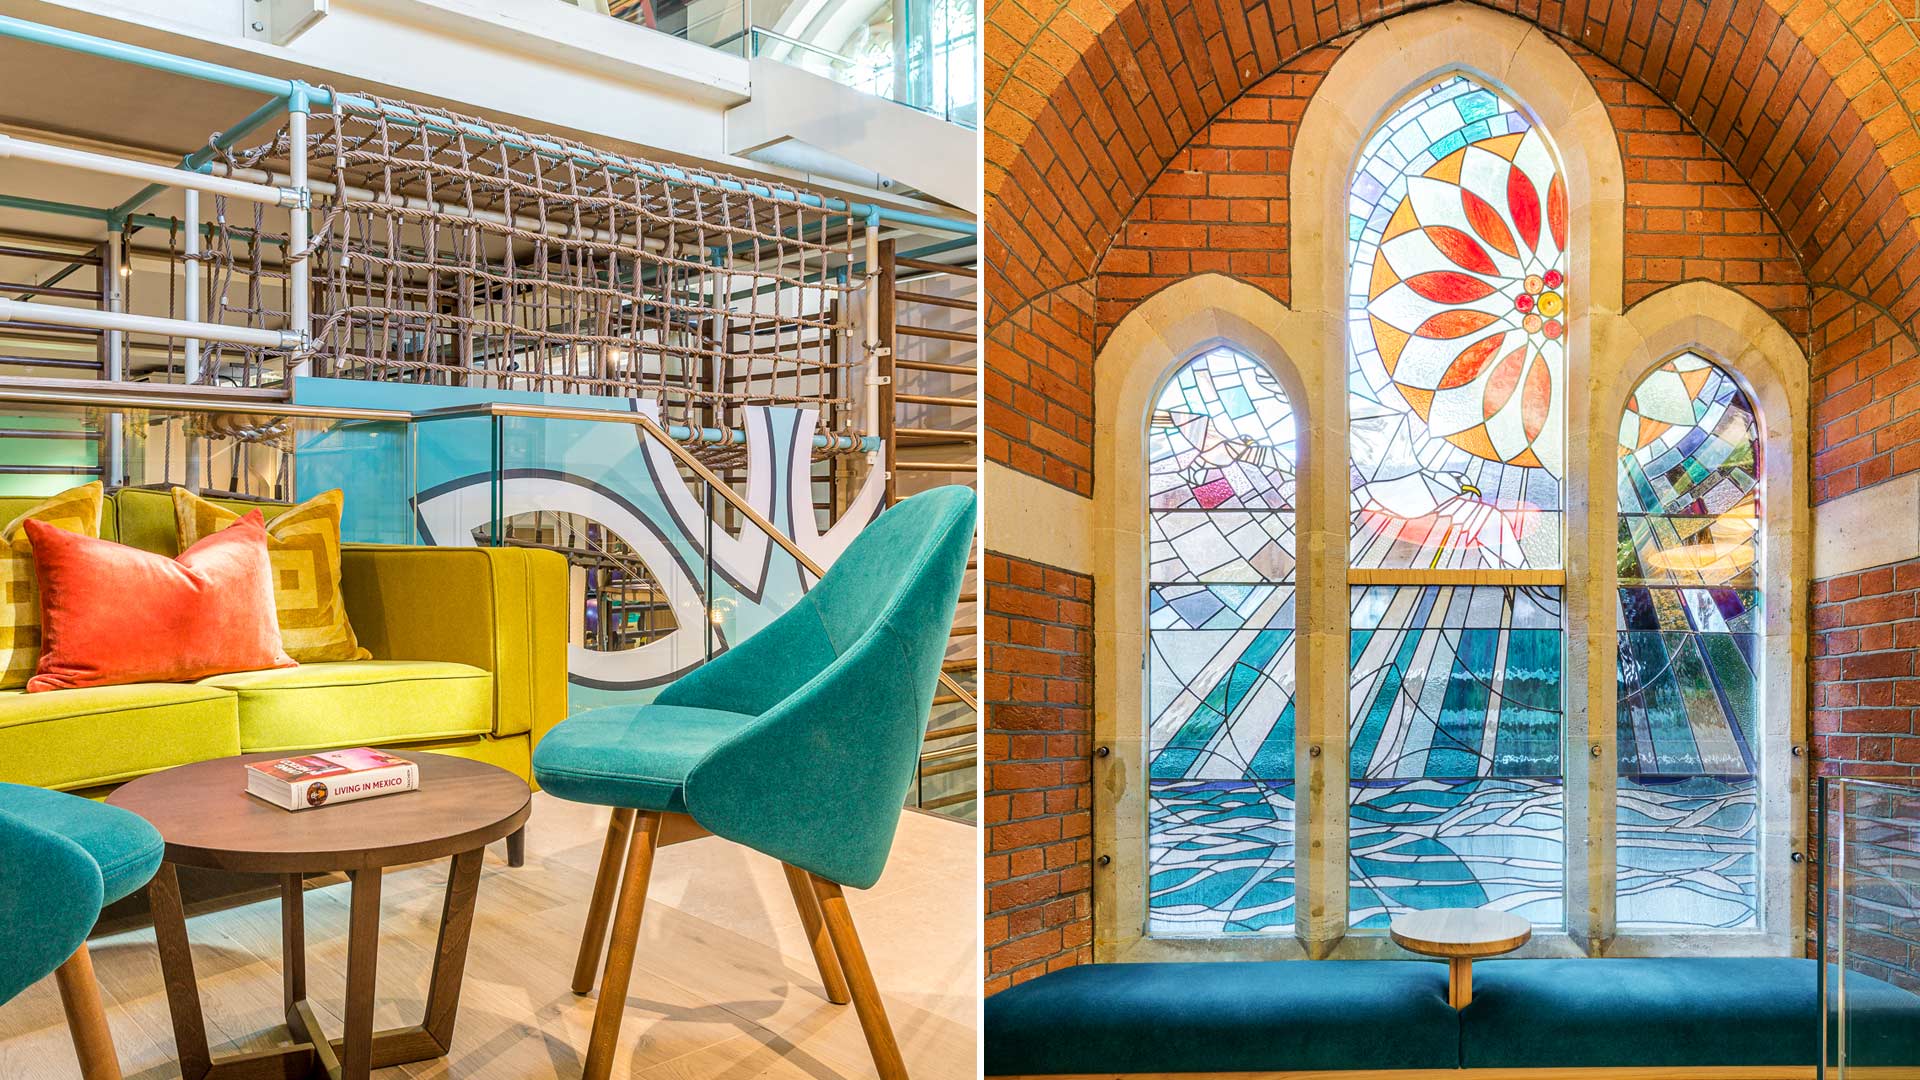 Architectural details of modern stained glass window and lounge